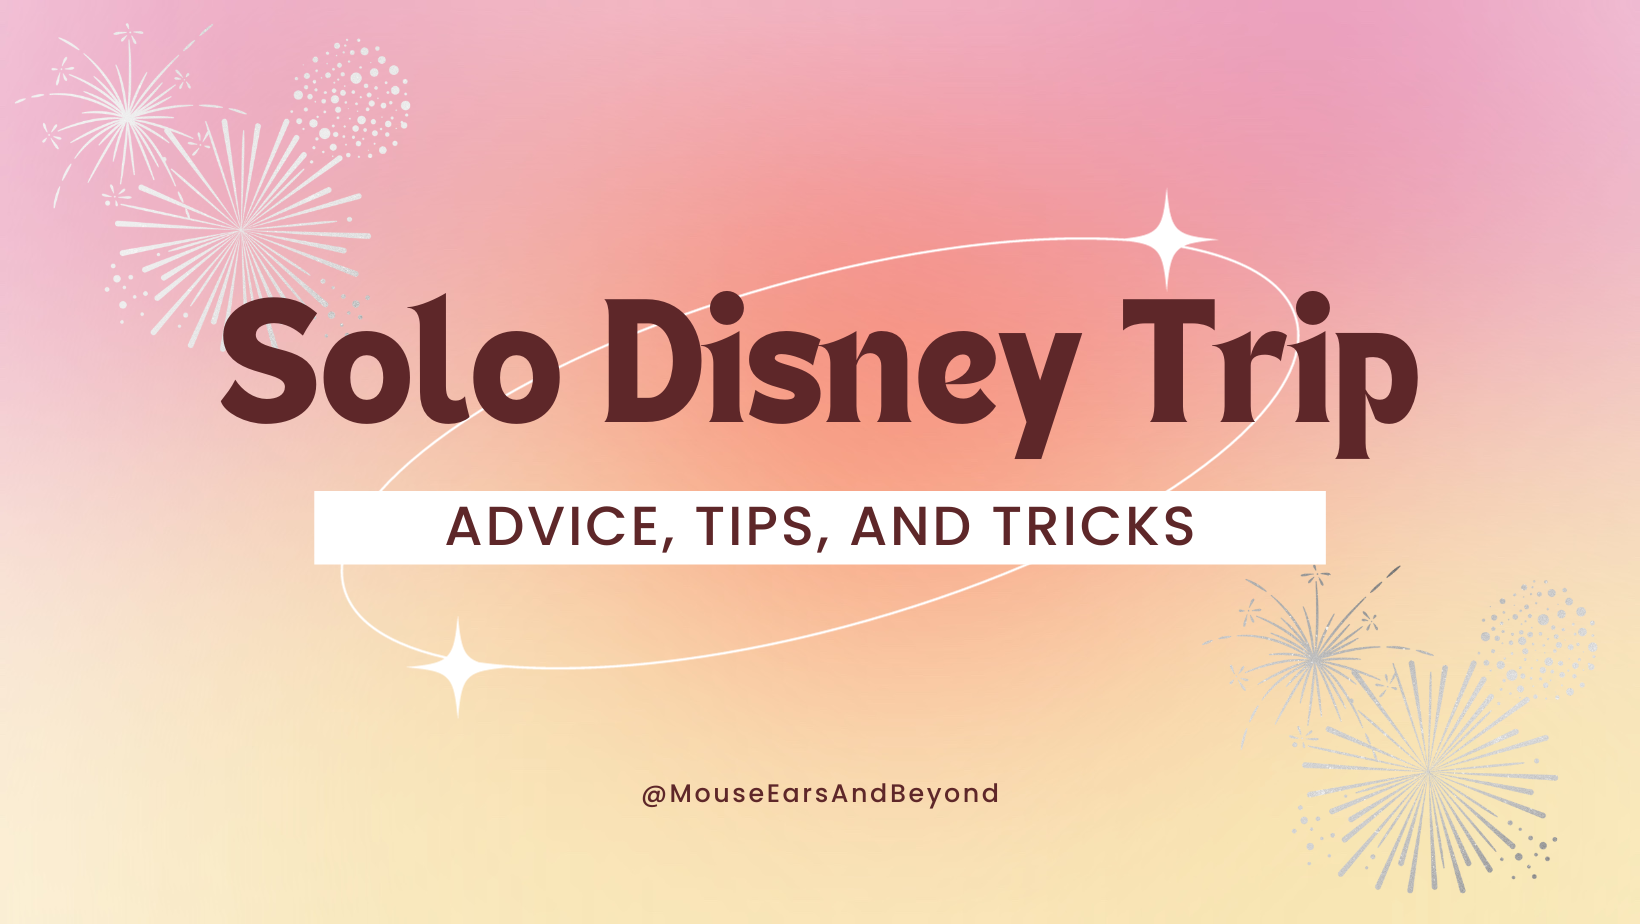 Tips for Solo Disney Travelers: Embracing the Magic on Your Own Terms